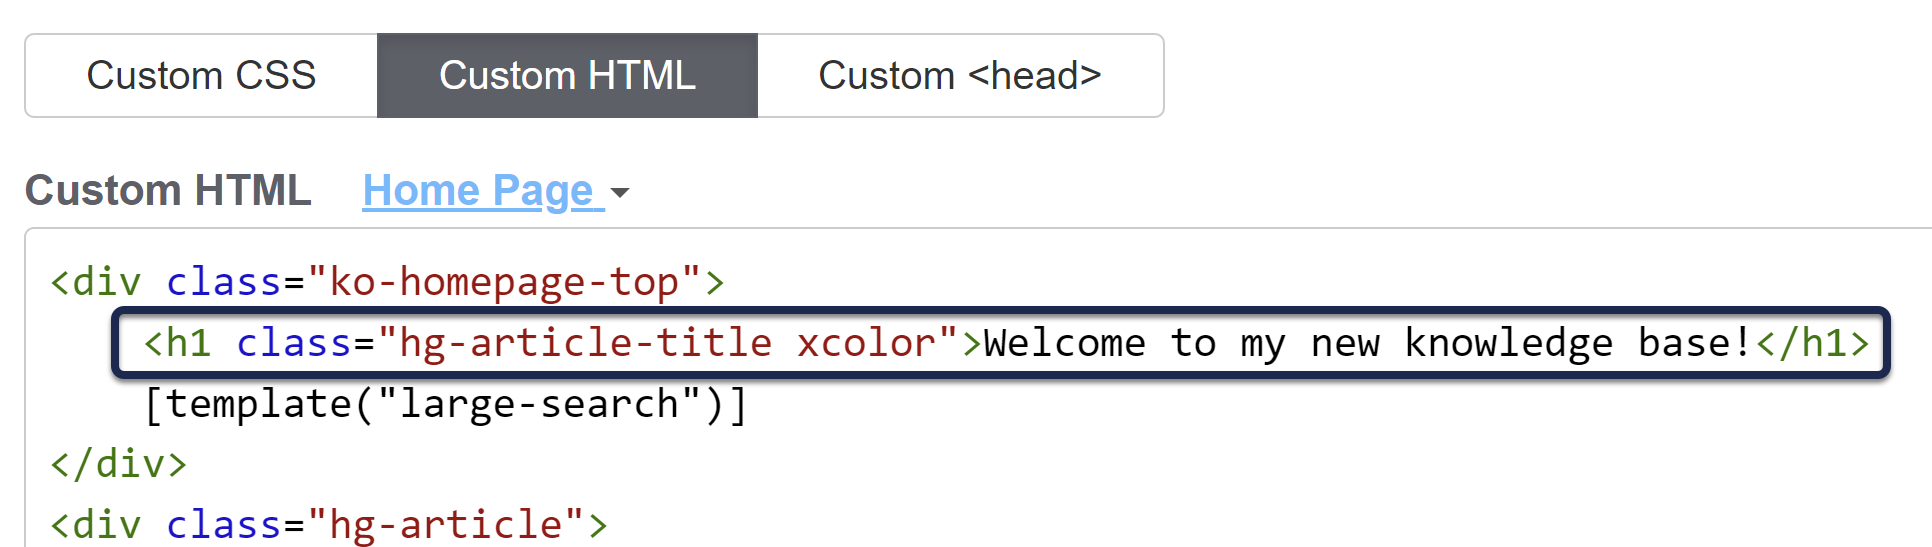 The Custom HTML Home Page editor in Style Settings. A callout has been added to draw attention to the h1 with the classes of hg-article-title and xcolor.